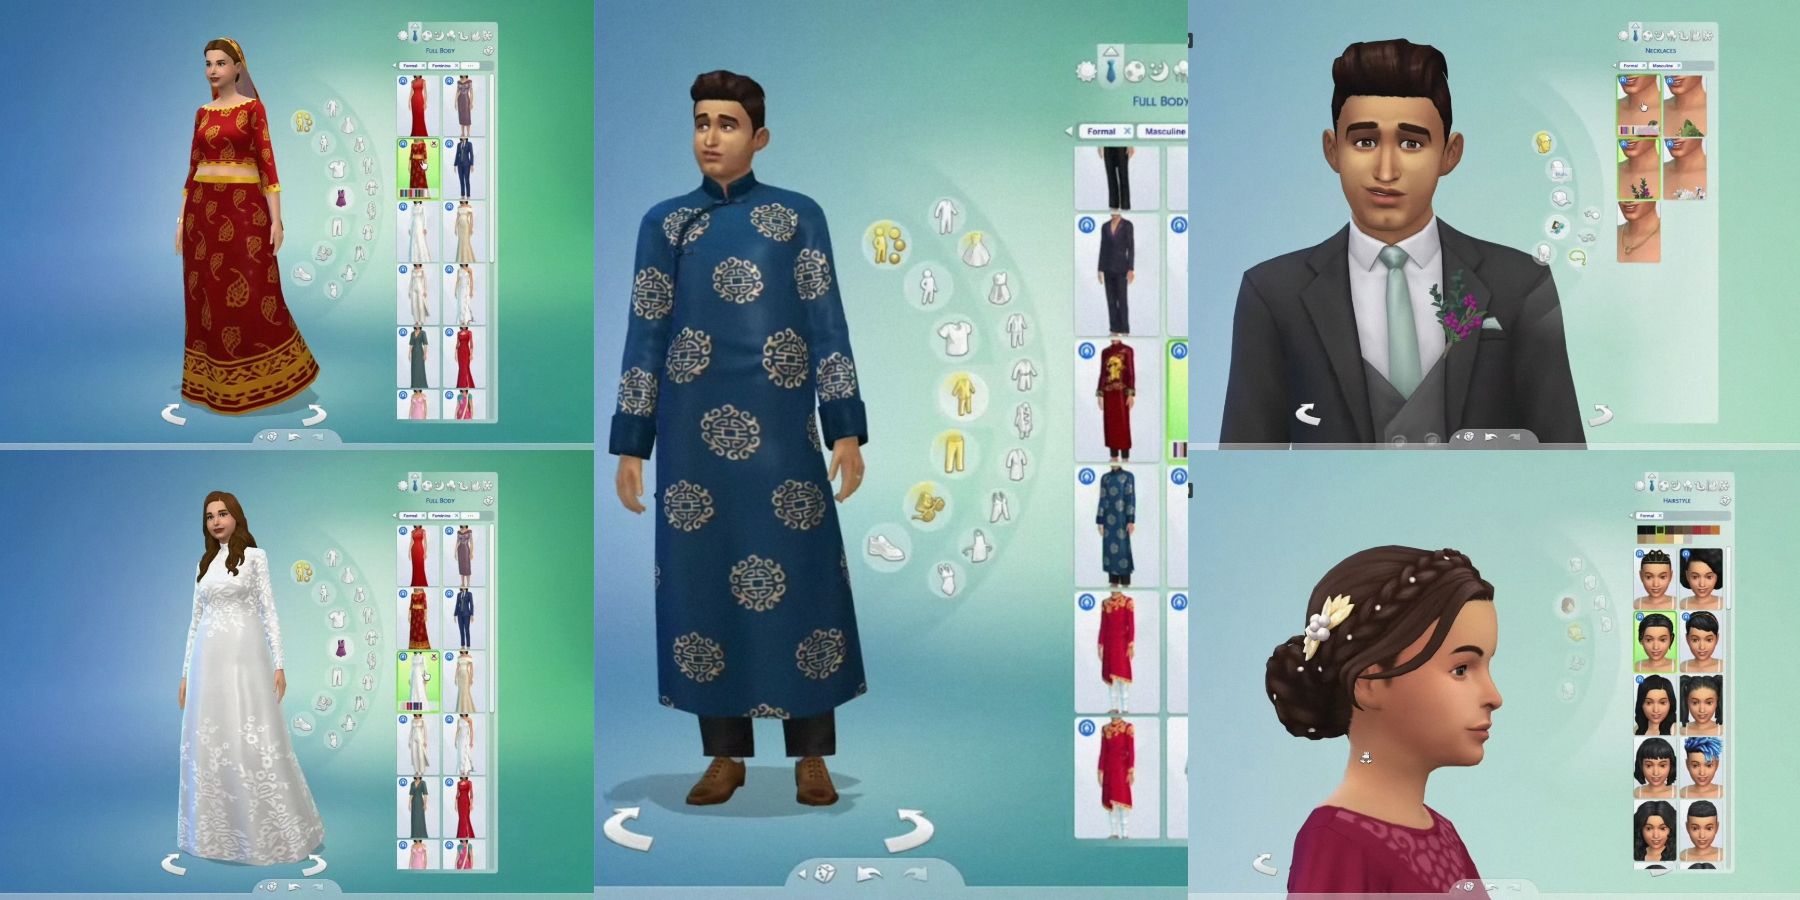 sims 4 how to change appearance